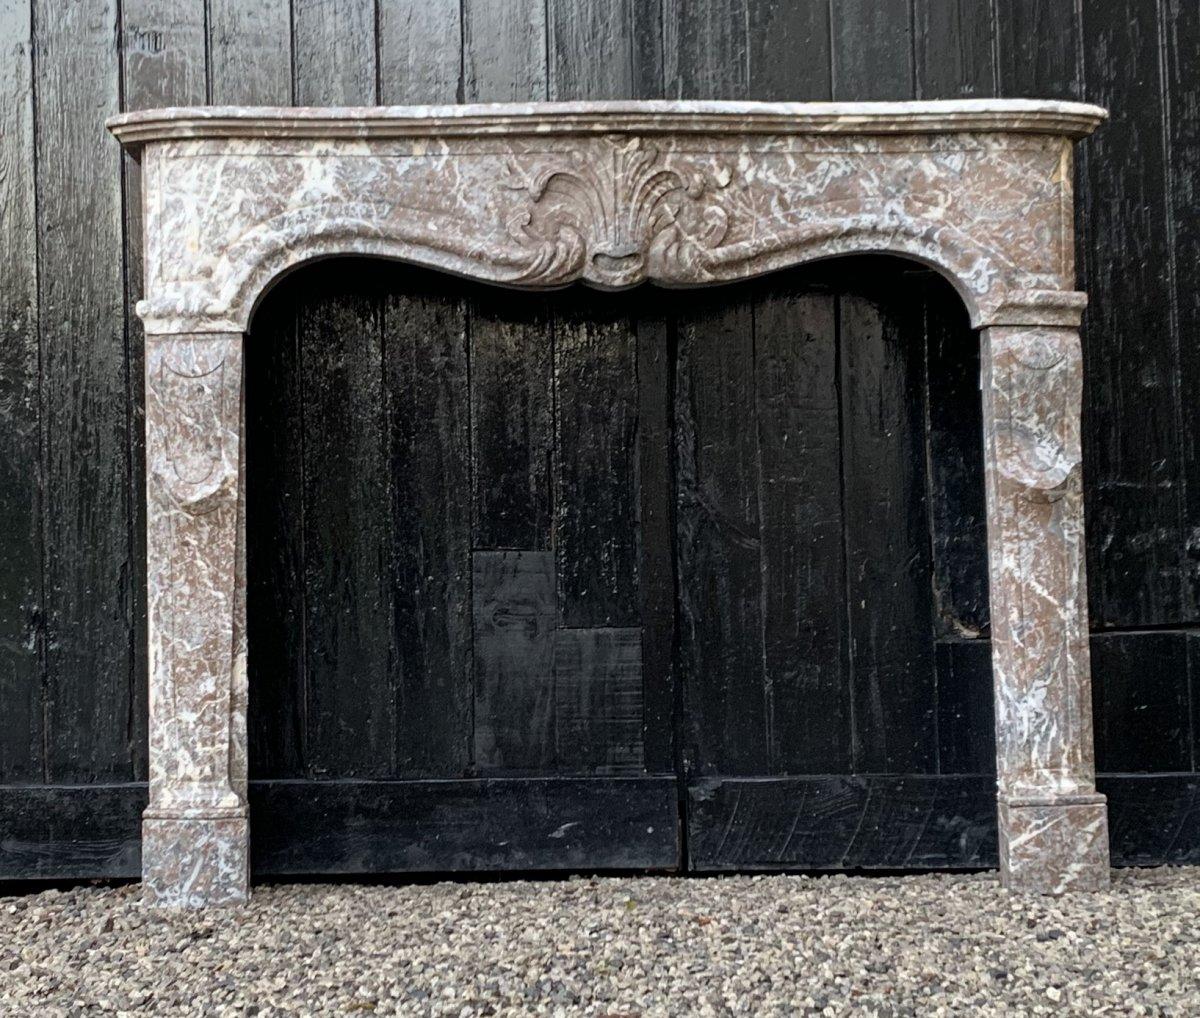 Louis XV fireplace in gray Ardennes marble 

Dimensions fireplace: 97 x 118cm